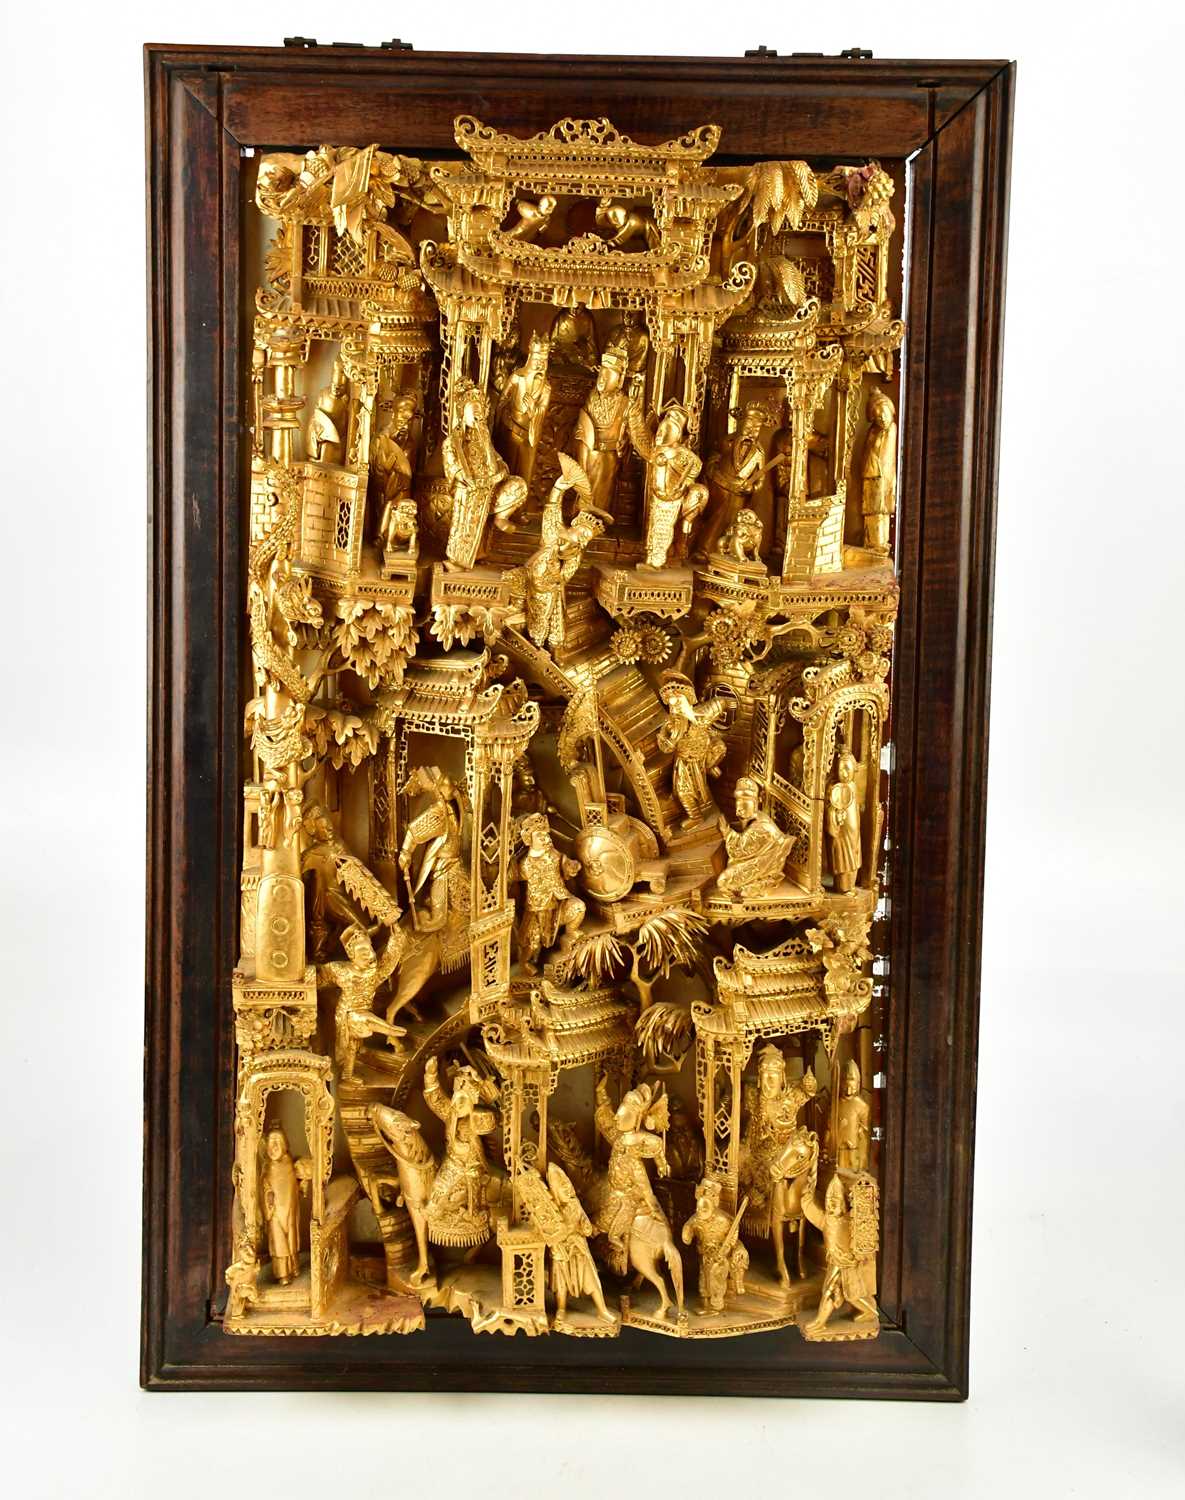 A Chinese gilt wood panel depicting figures in a temple scene within rosewood frame, overall 82 x